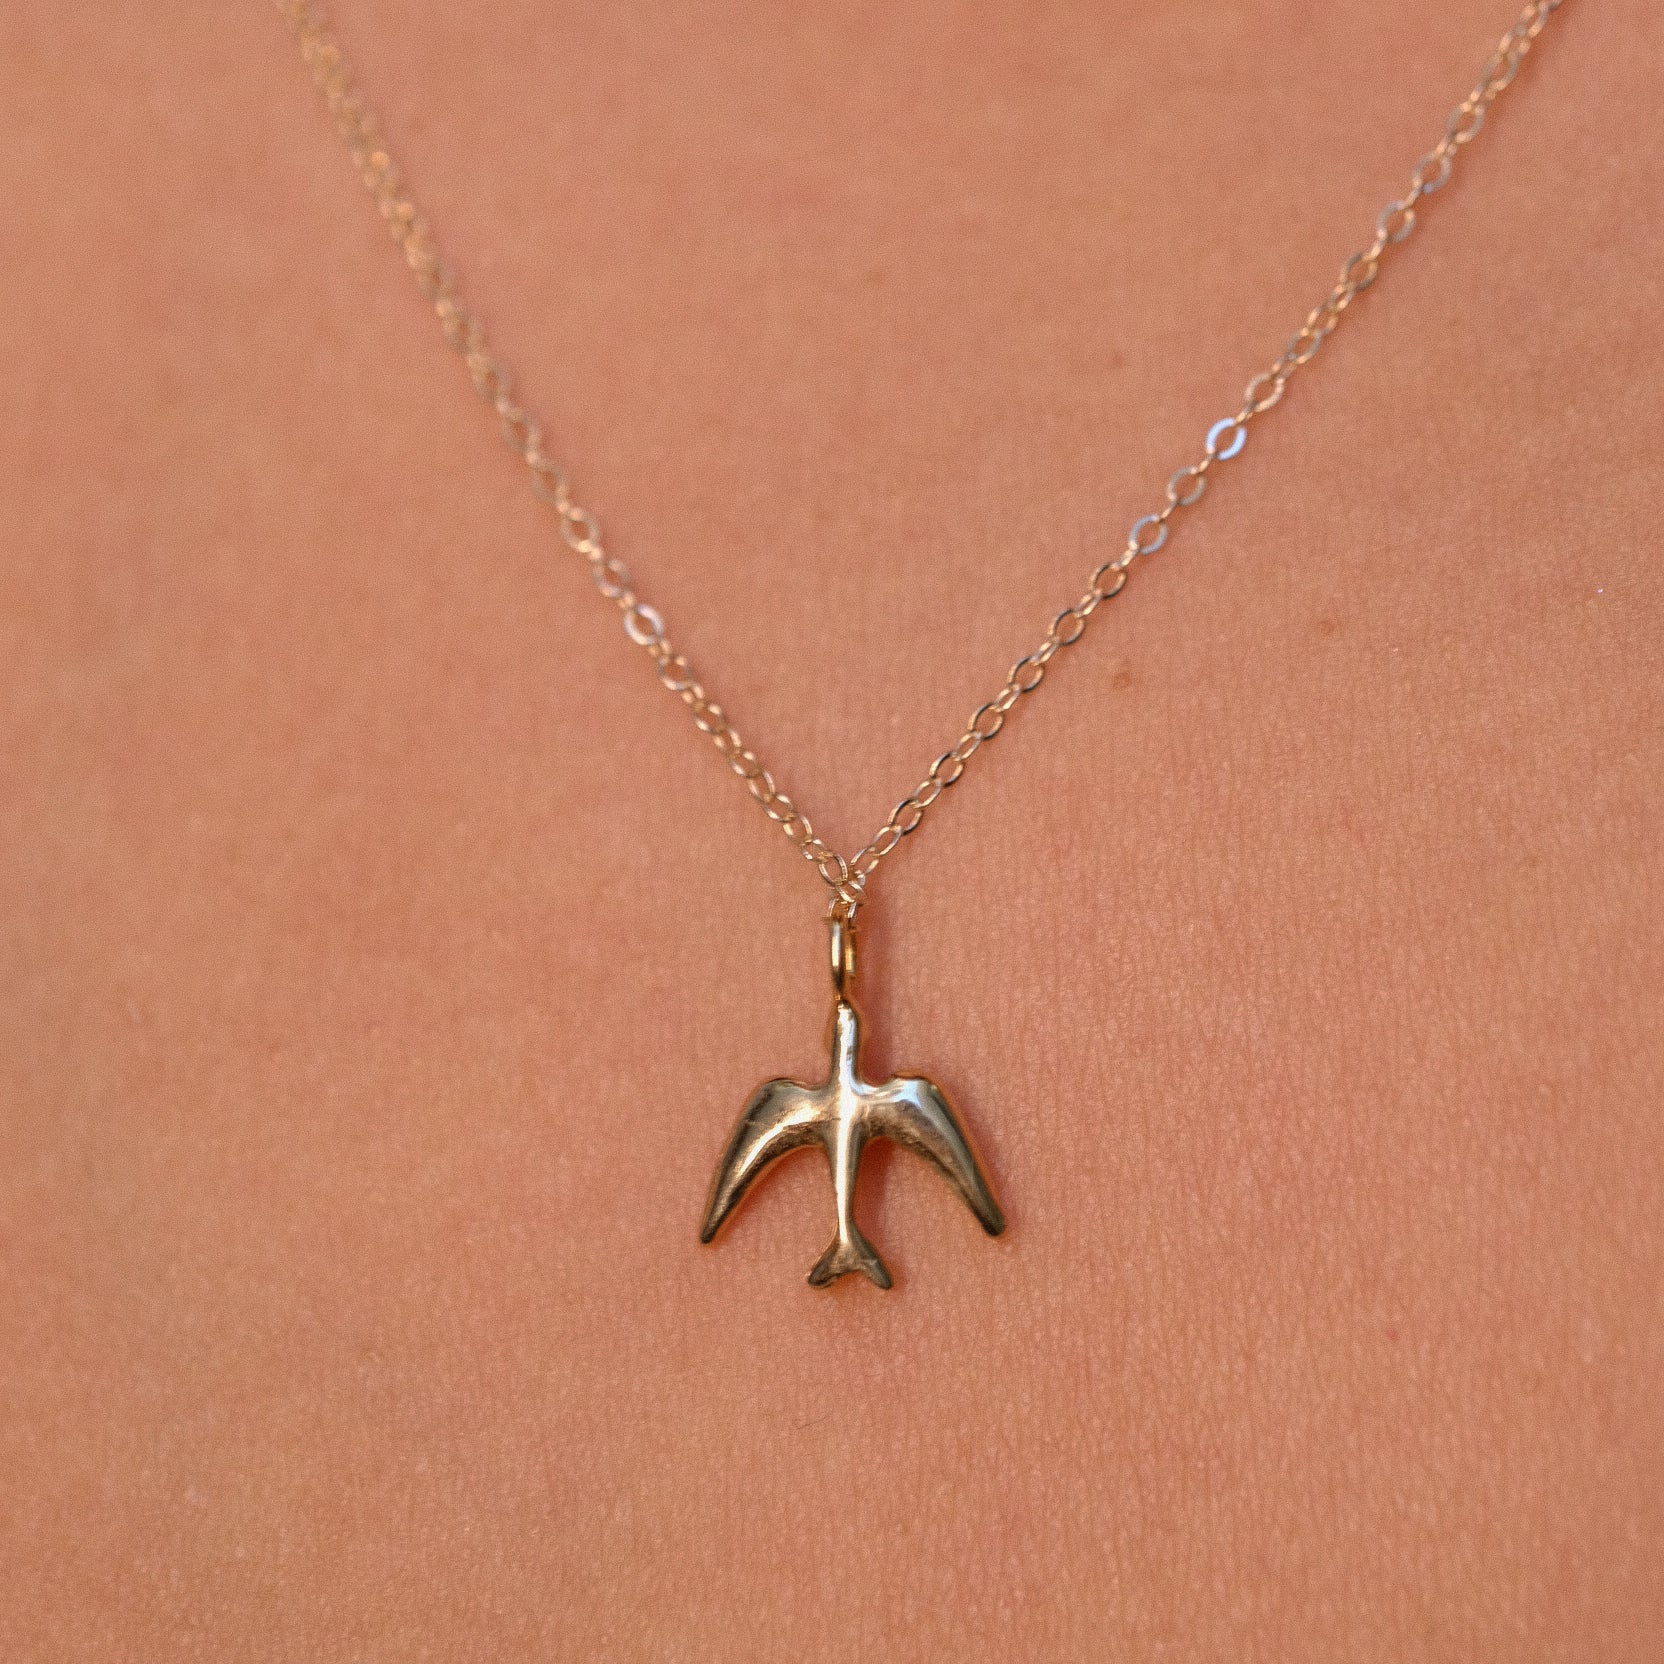 The Lovely Swallow Necklace